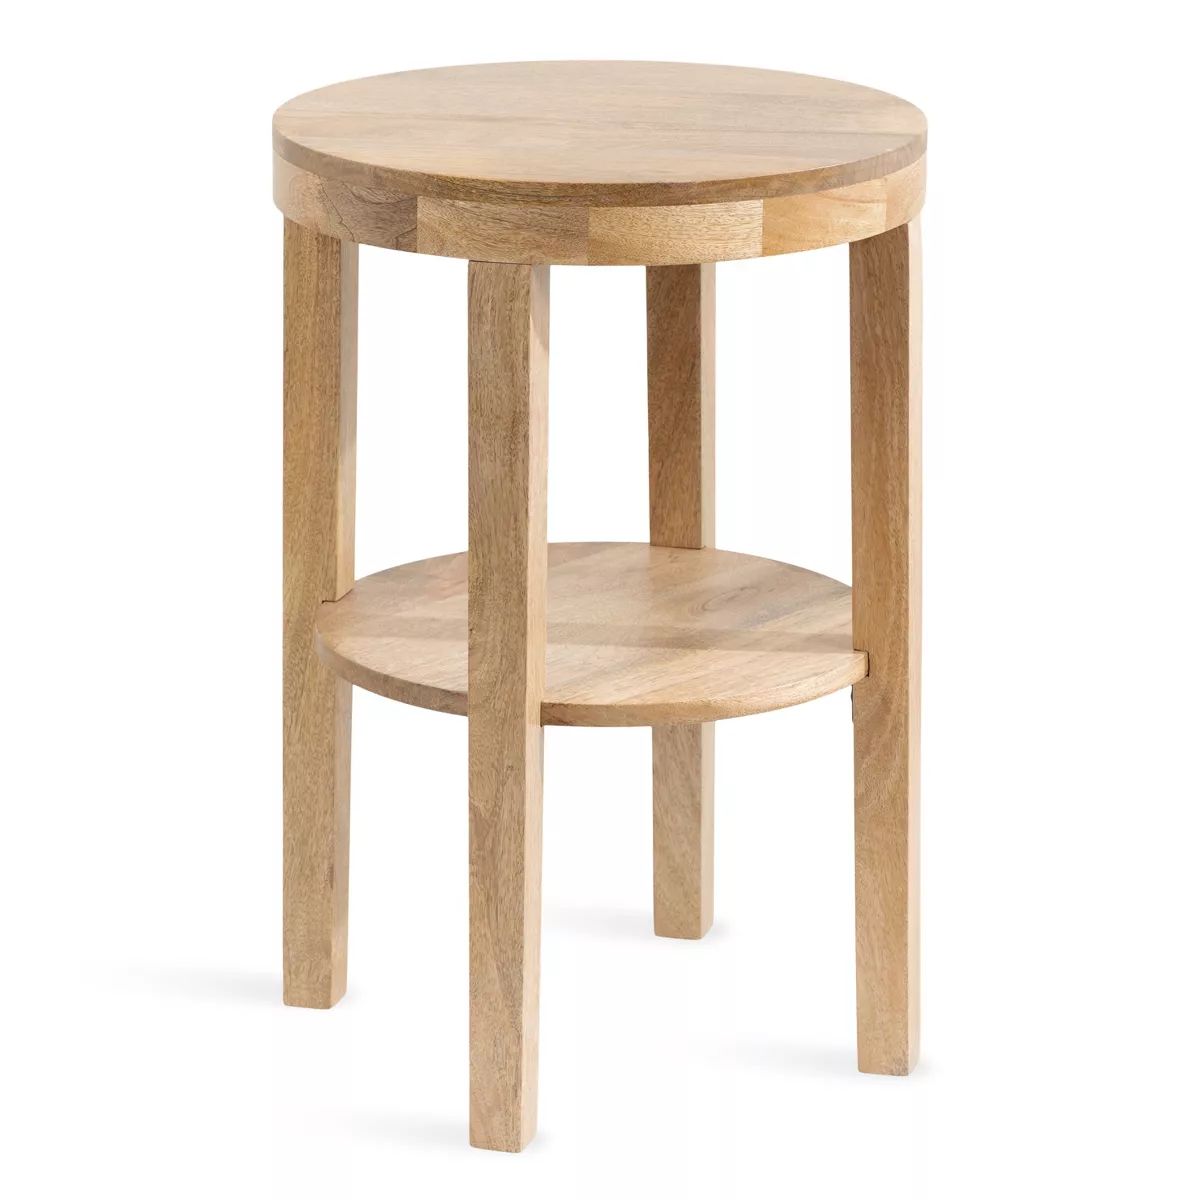 Kate and Laurel Talcott Round Wood Side Table | Target